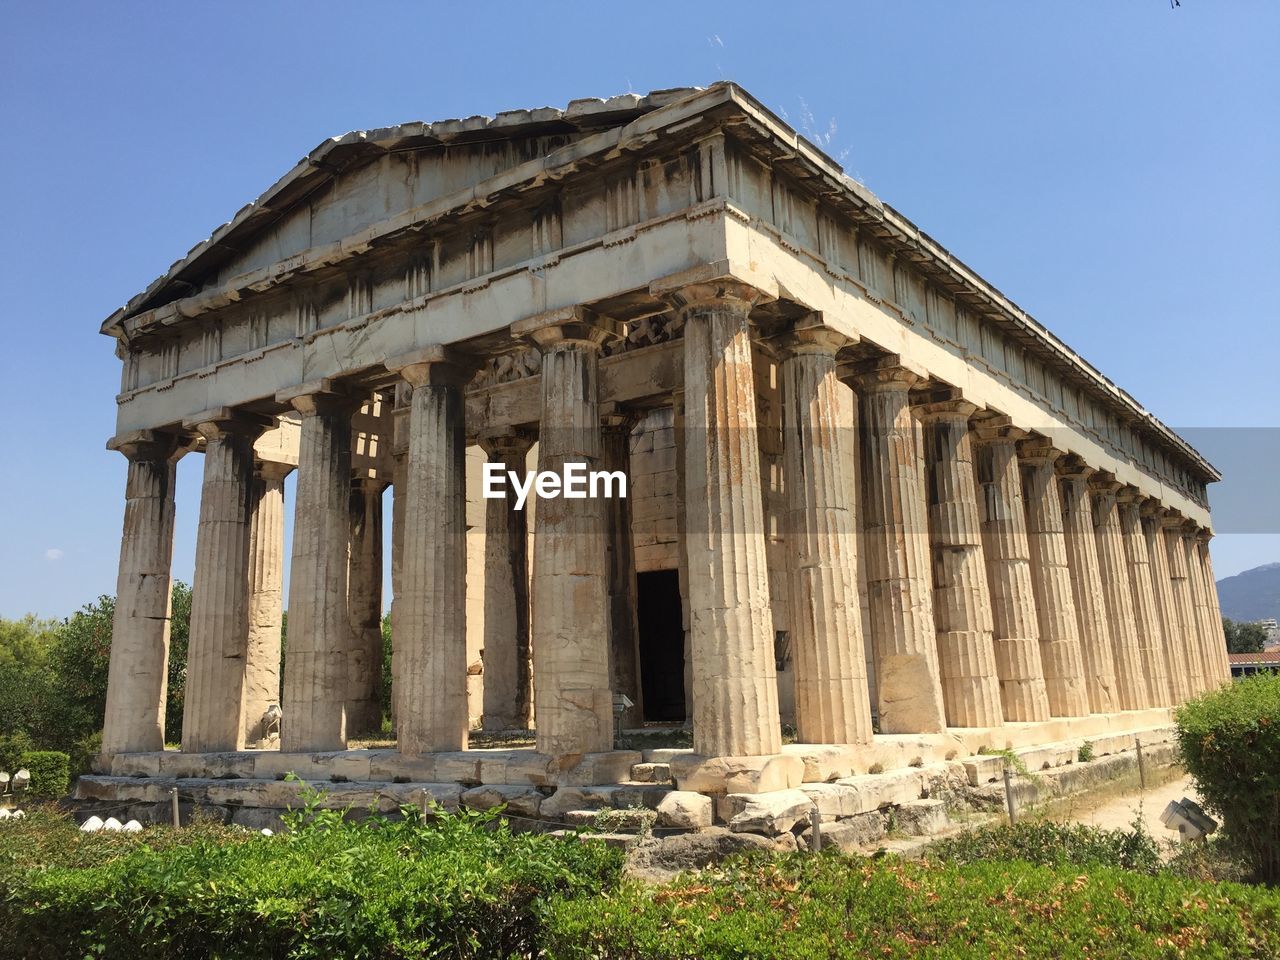 The temple of hephaestus or hephaisteion, a doric peripteral temple located at the agora of athens.